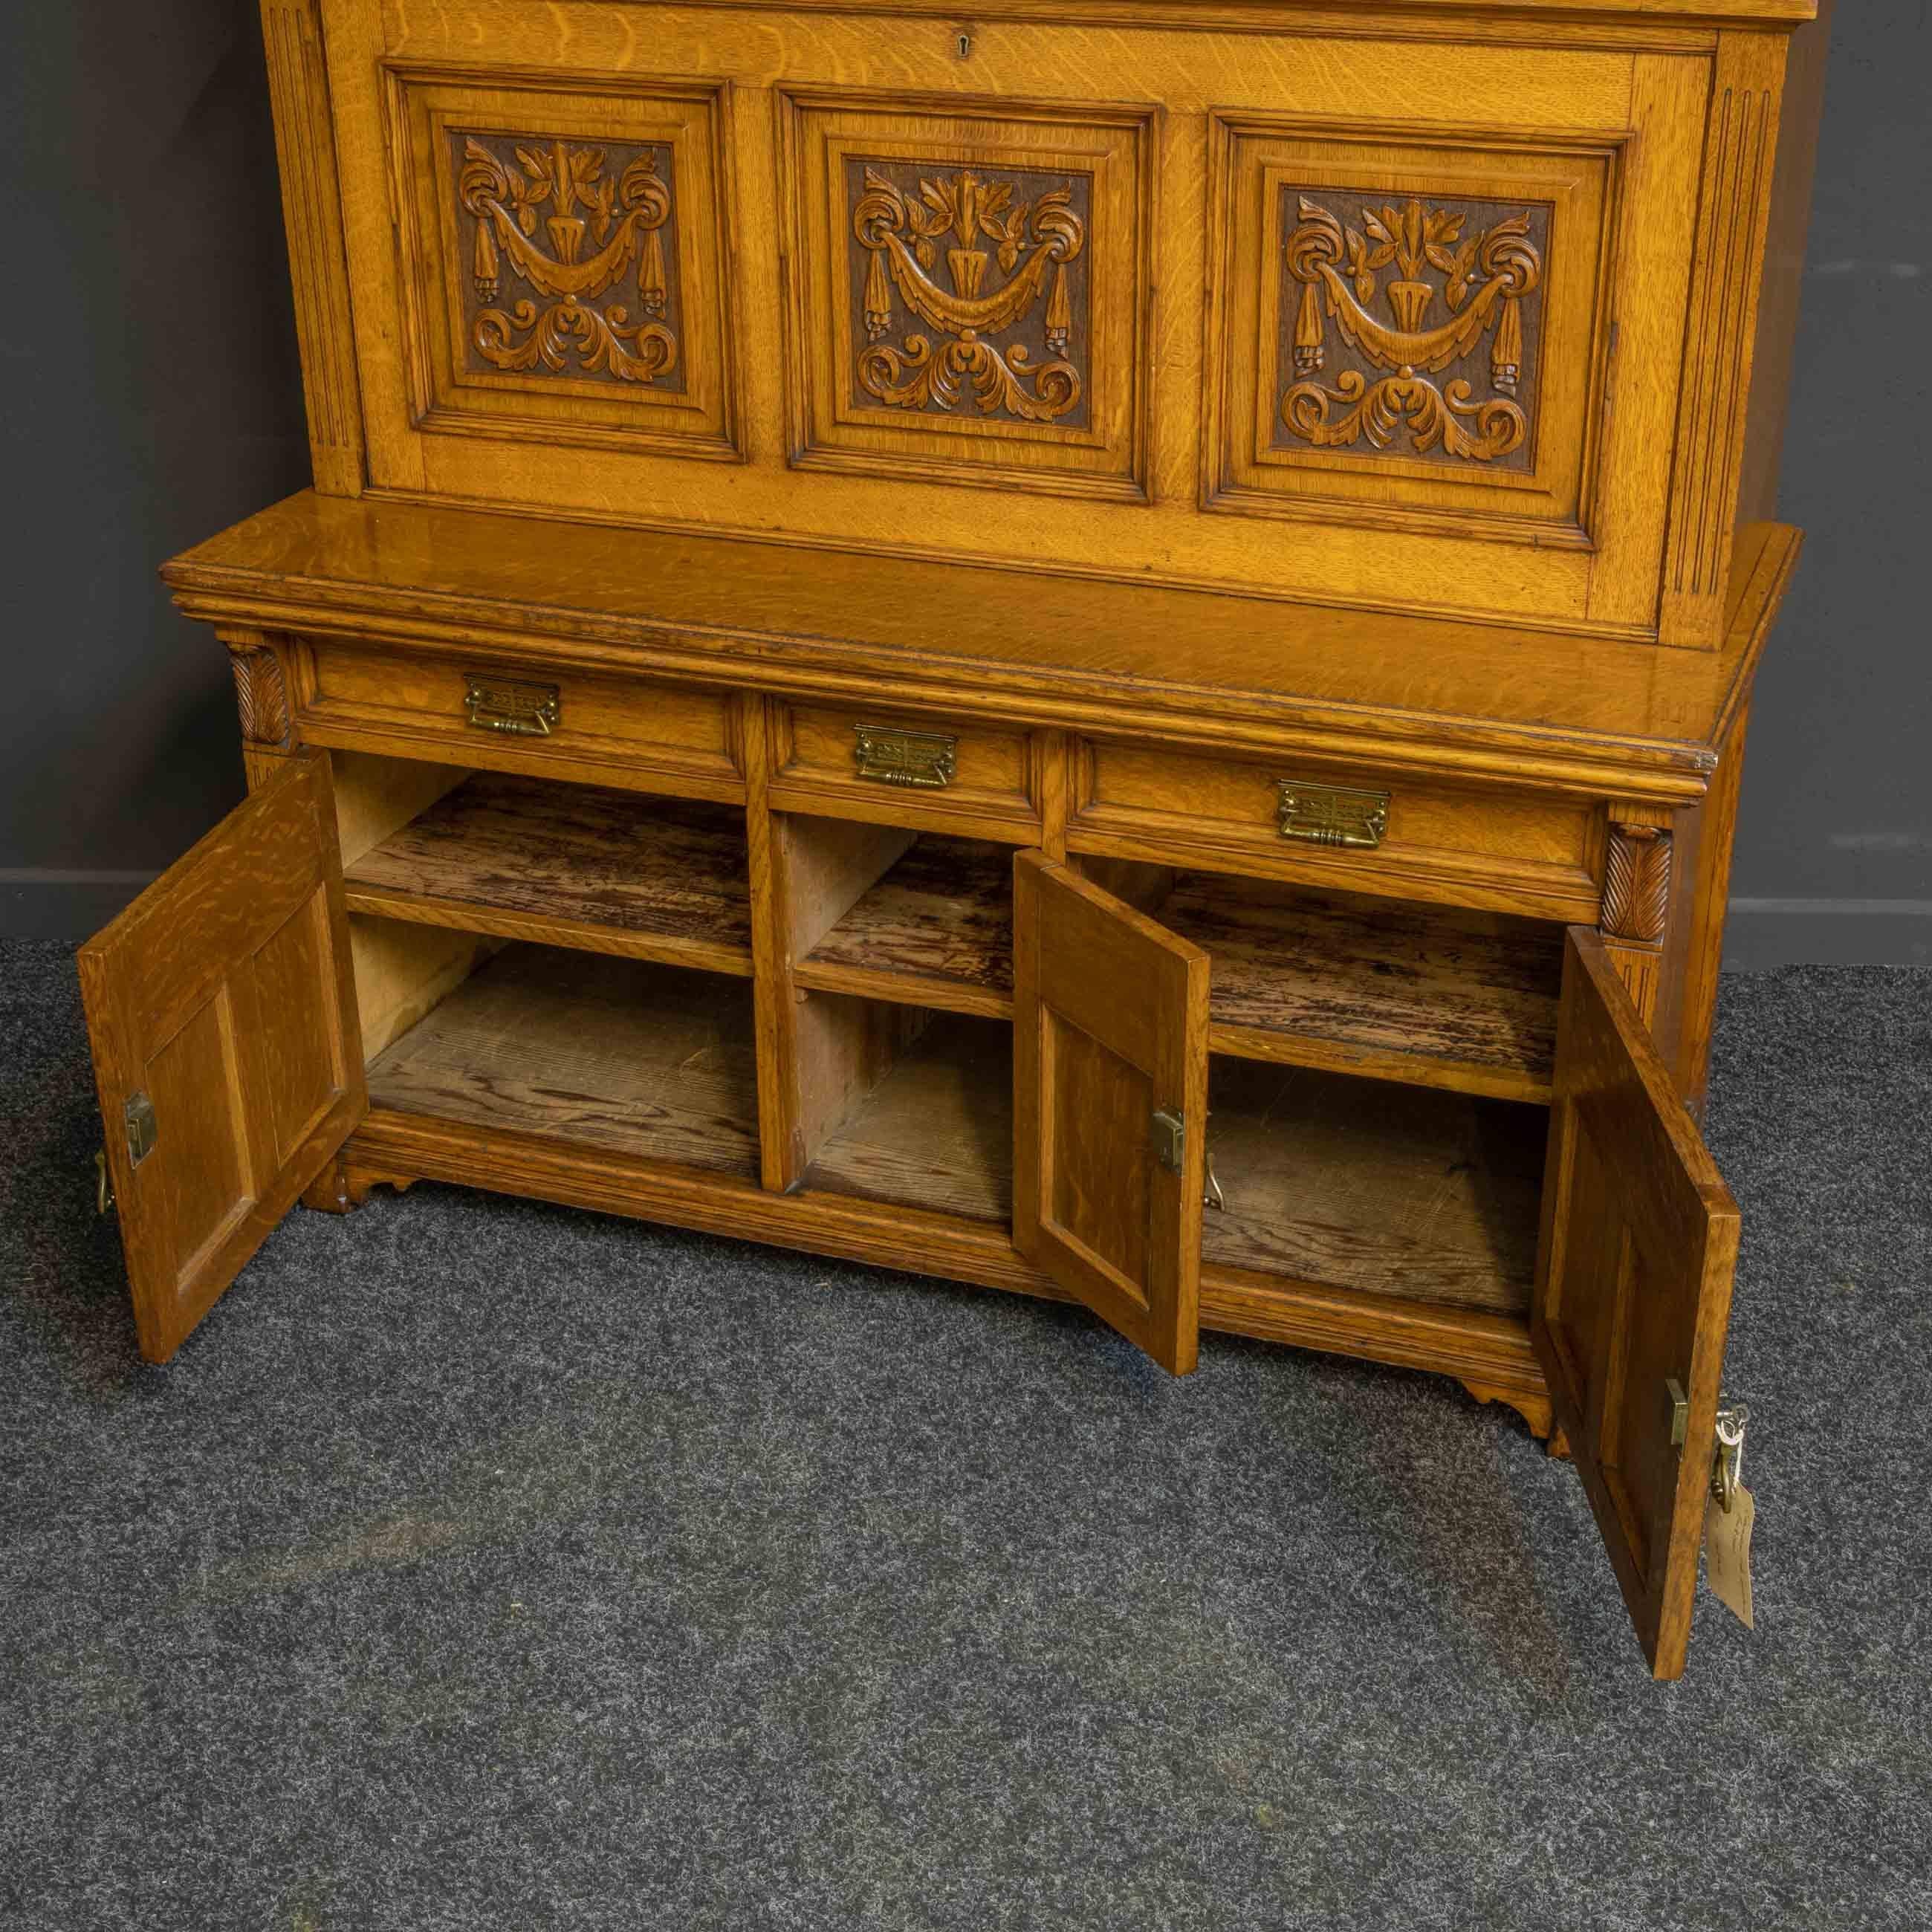 Edwardian Oak Secretaire Bookcase In Good Condition For Sale In Manchester, GB